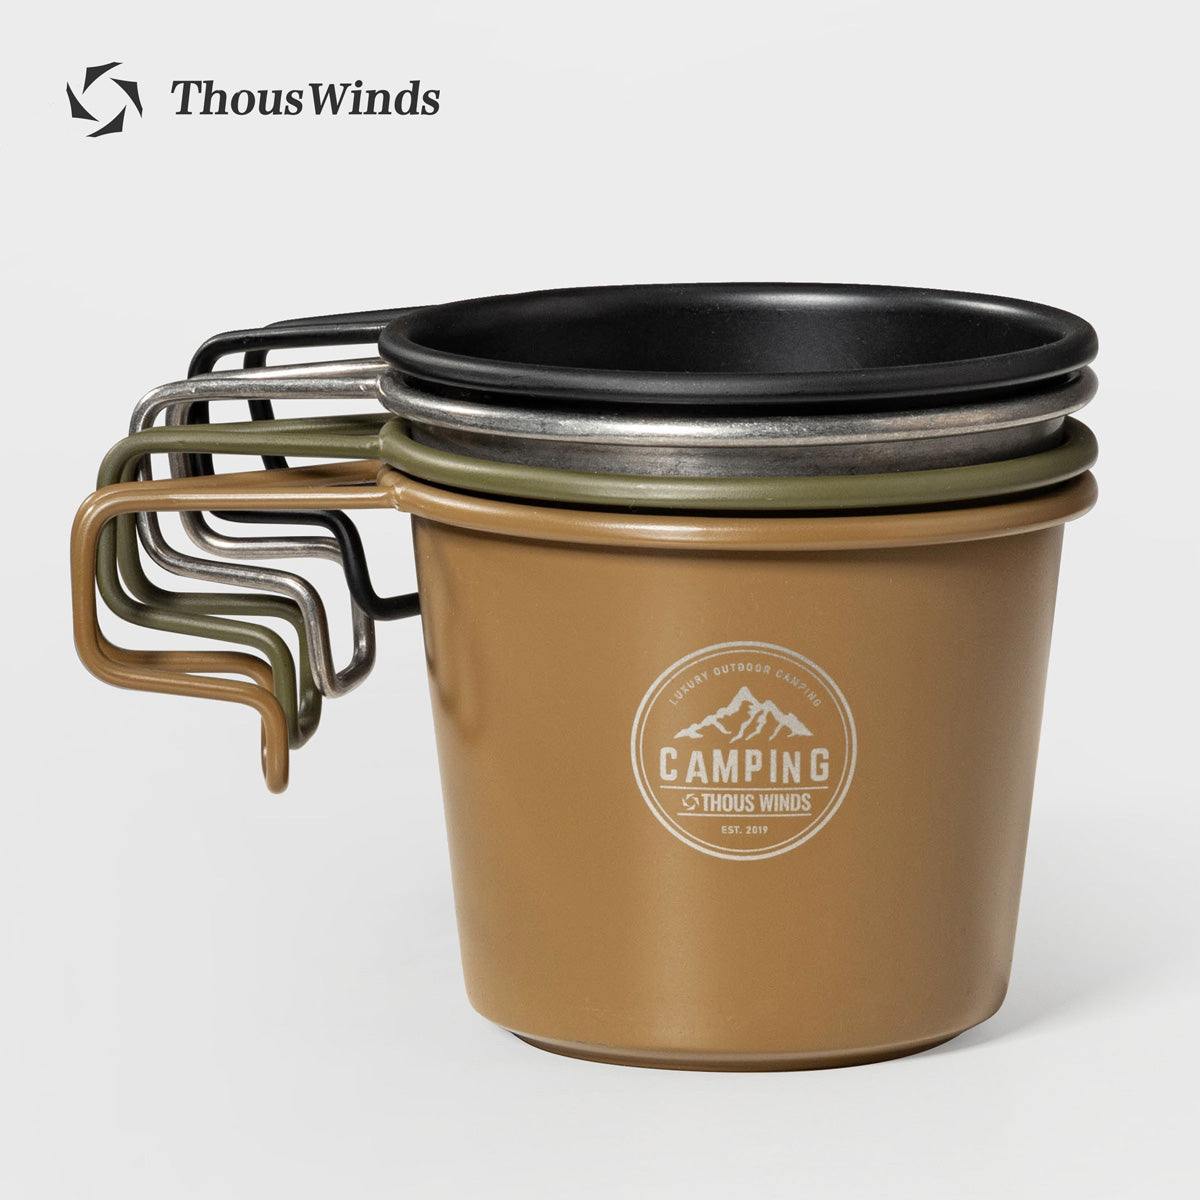 Thous Winds 350ml Sierra Cup - Olive Green